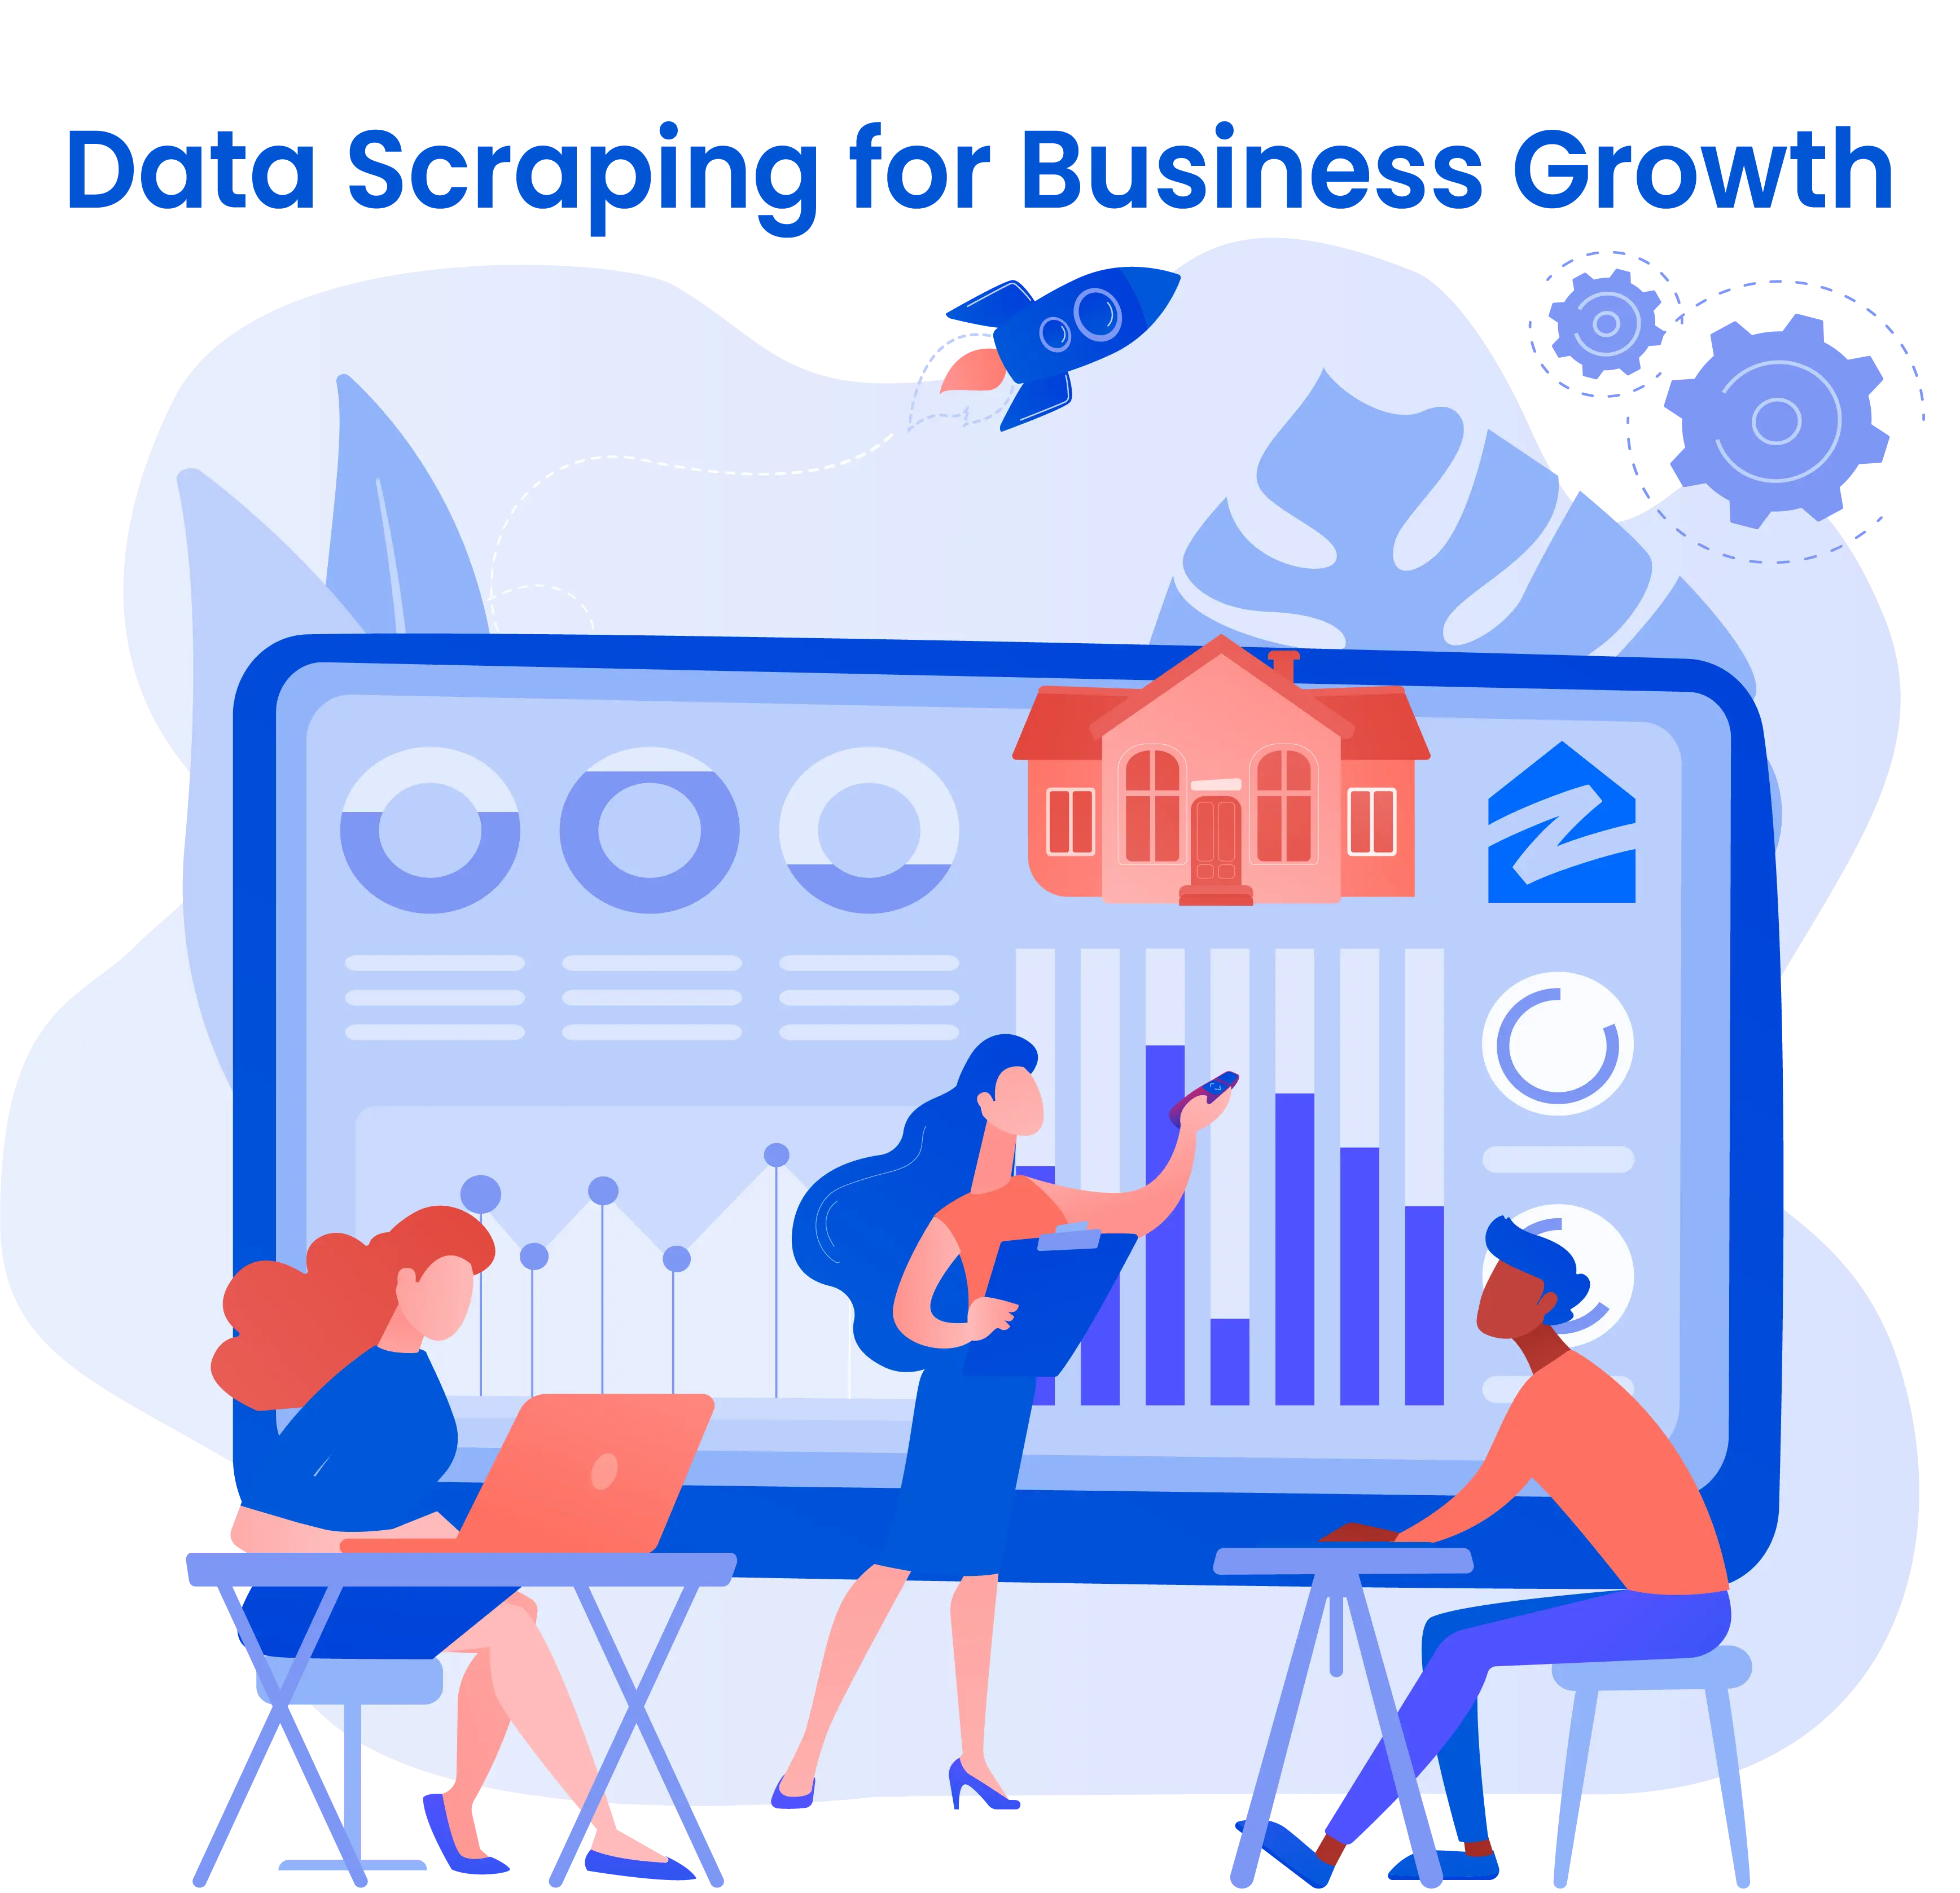 Data Scraping for Business Growth